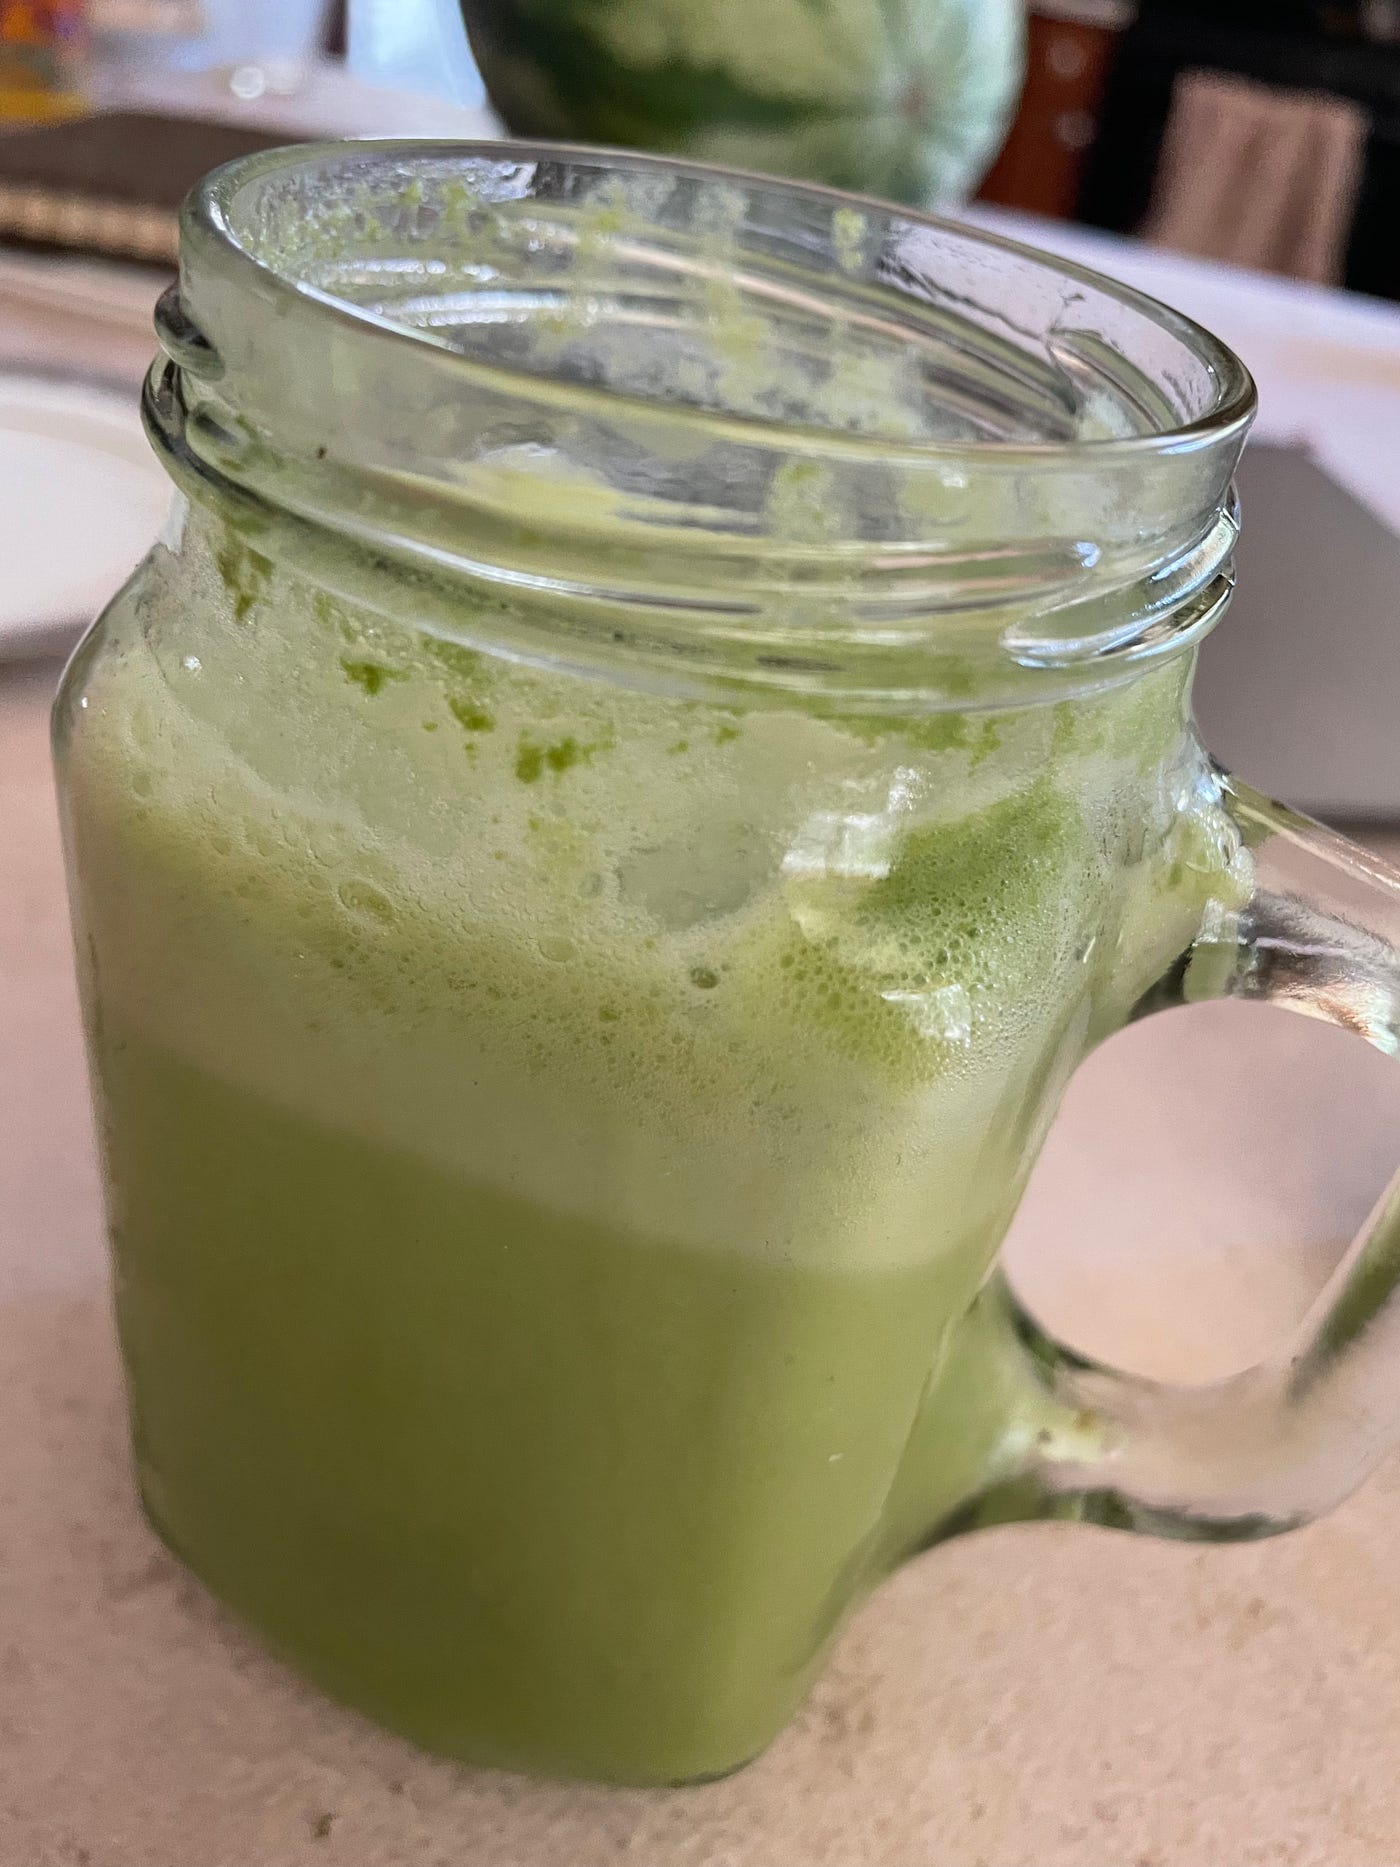 A close up view of a glass of green lemonaide.